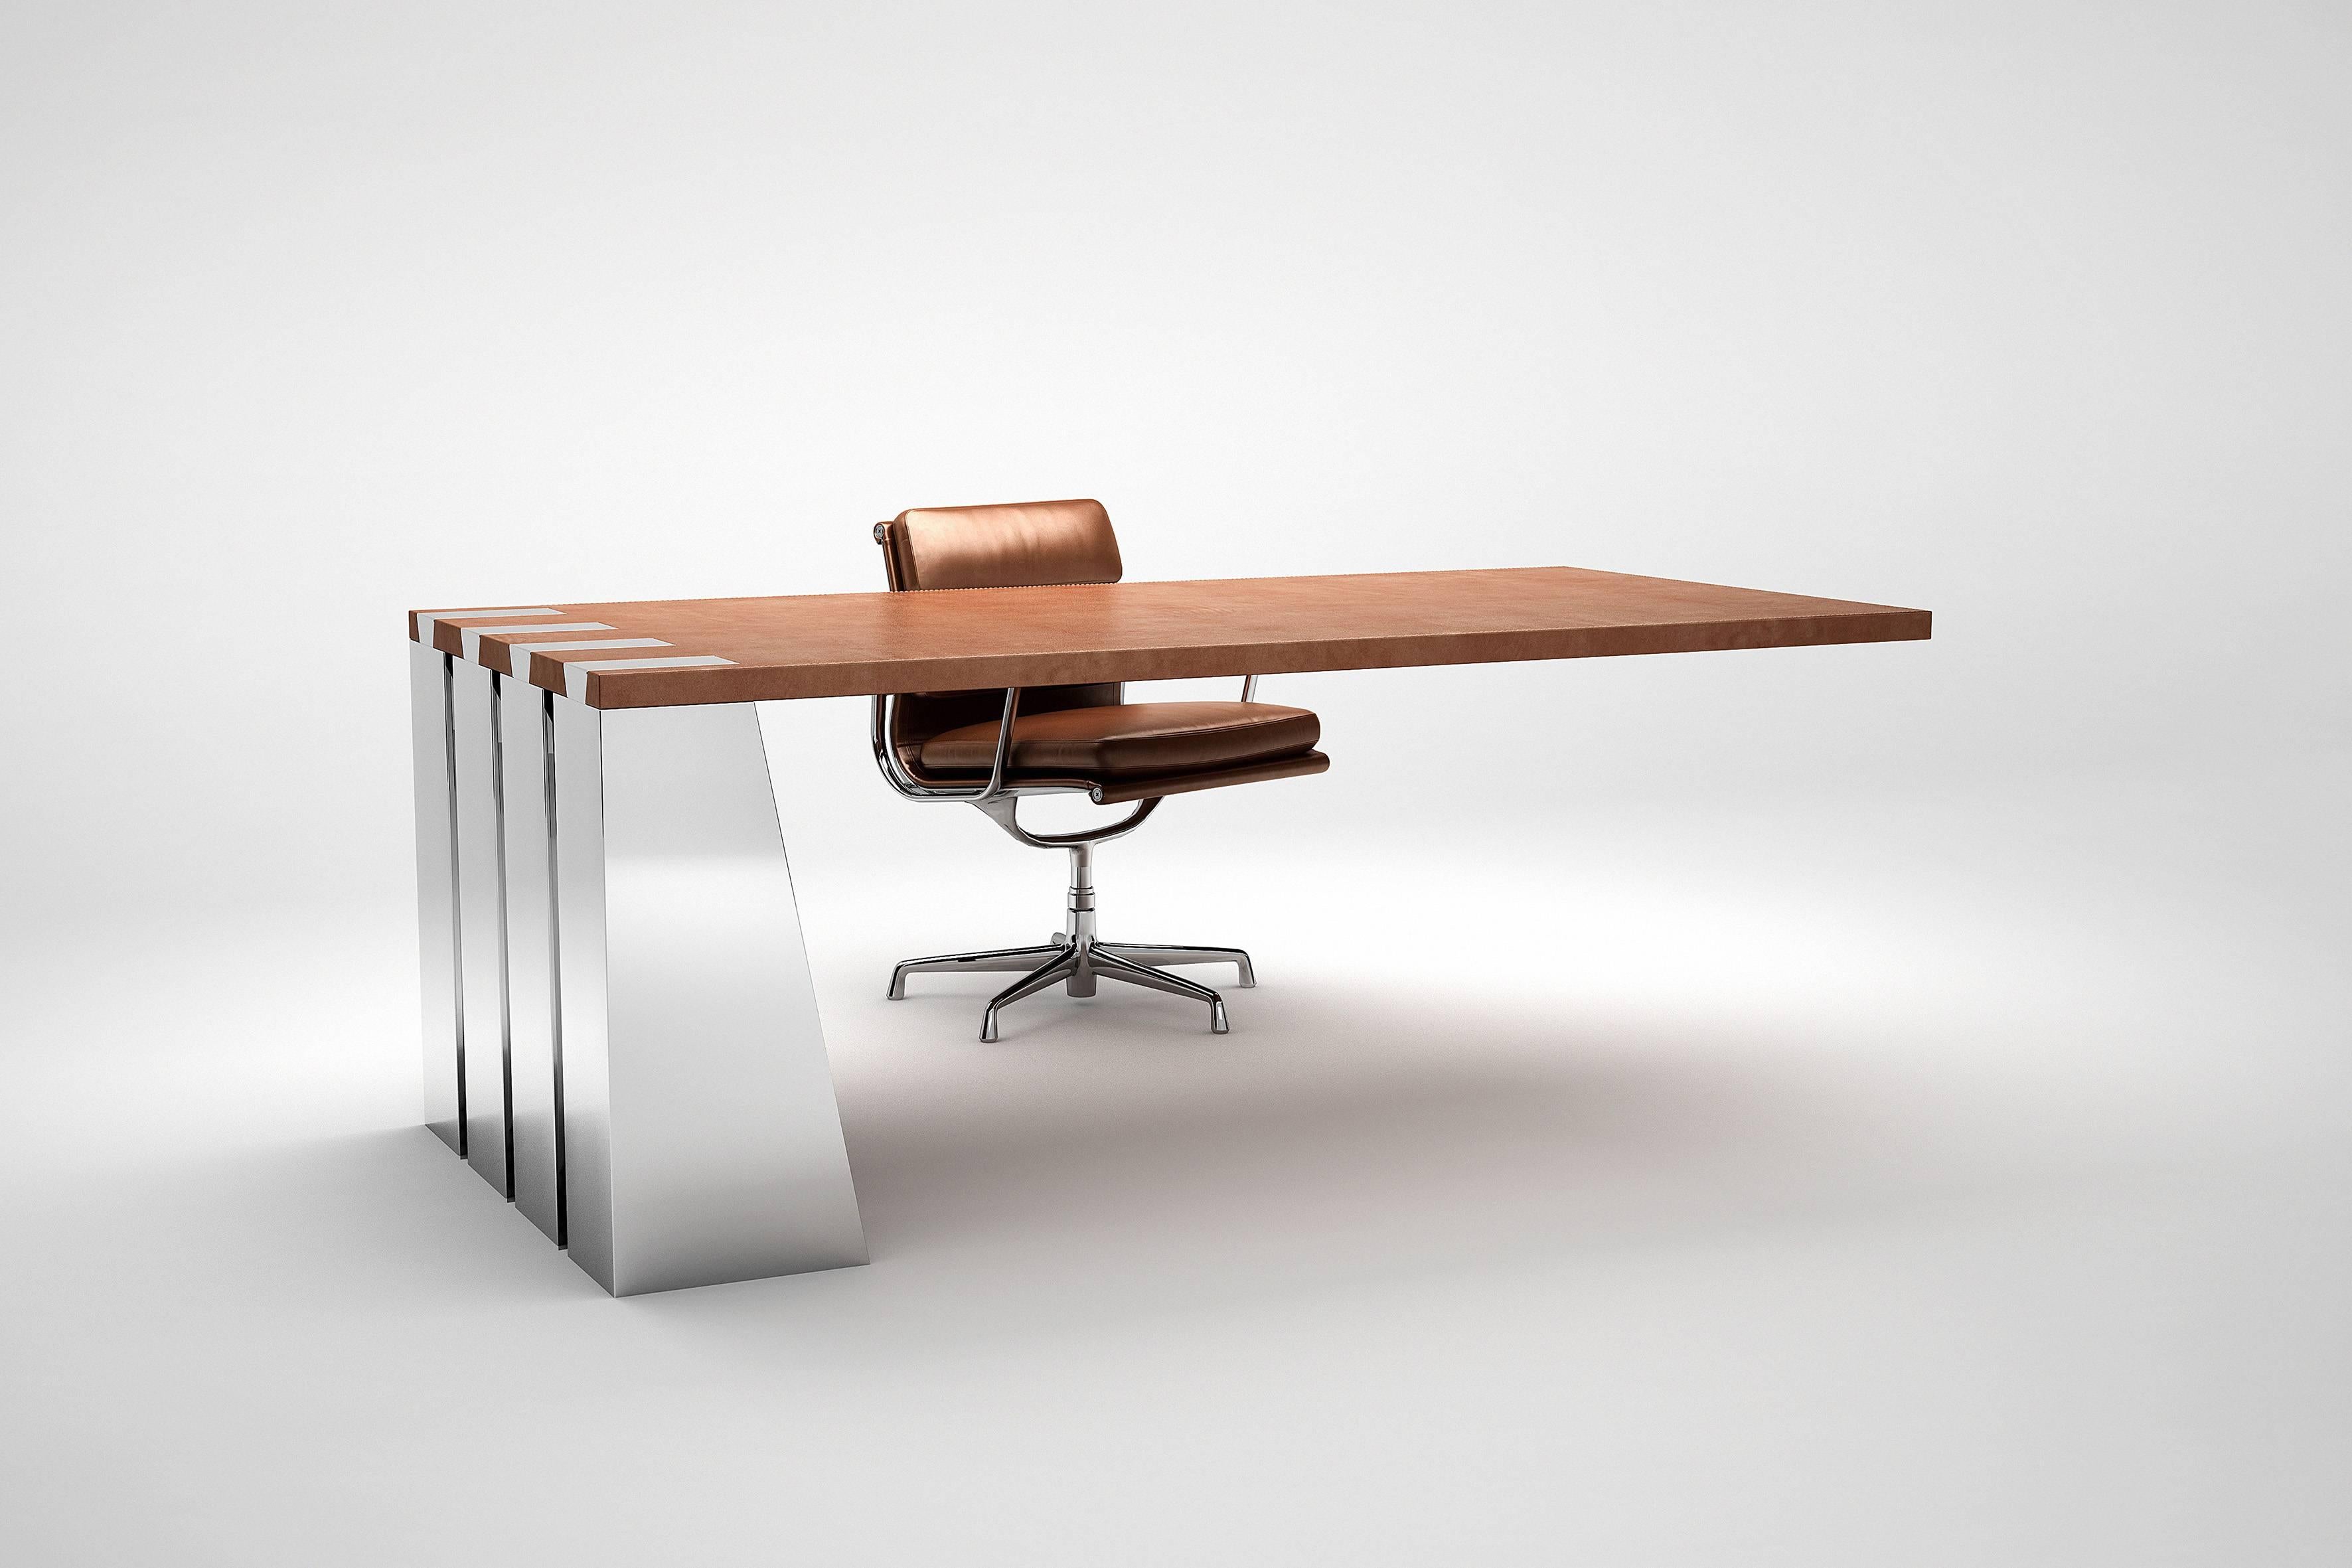 The Zeus desk is both daring and spectacular as the top seems off balance. The refinement of the leather top contrasts with the polished stainless steel legs. The assembling of the top on the four legs is made with elements in a shape of swallows